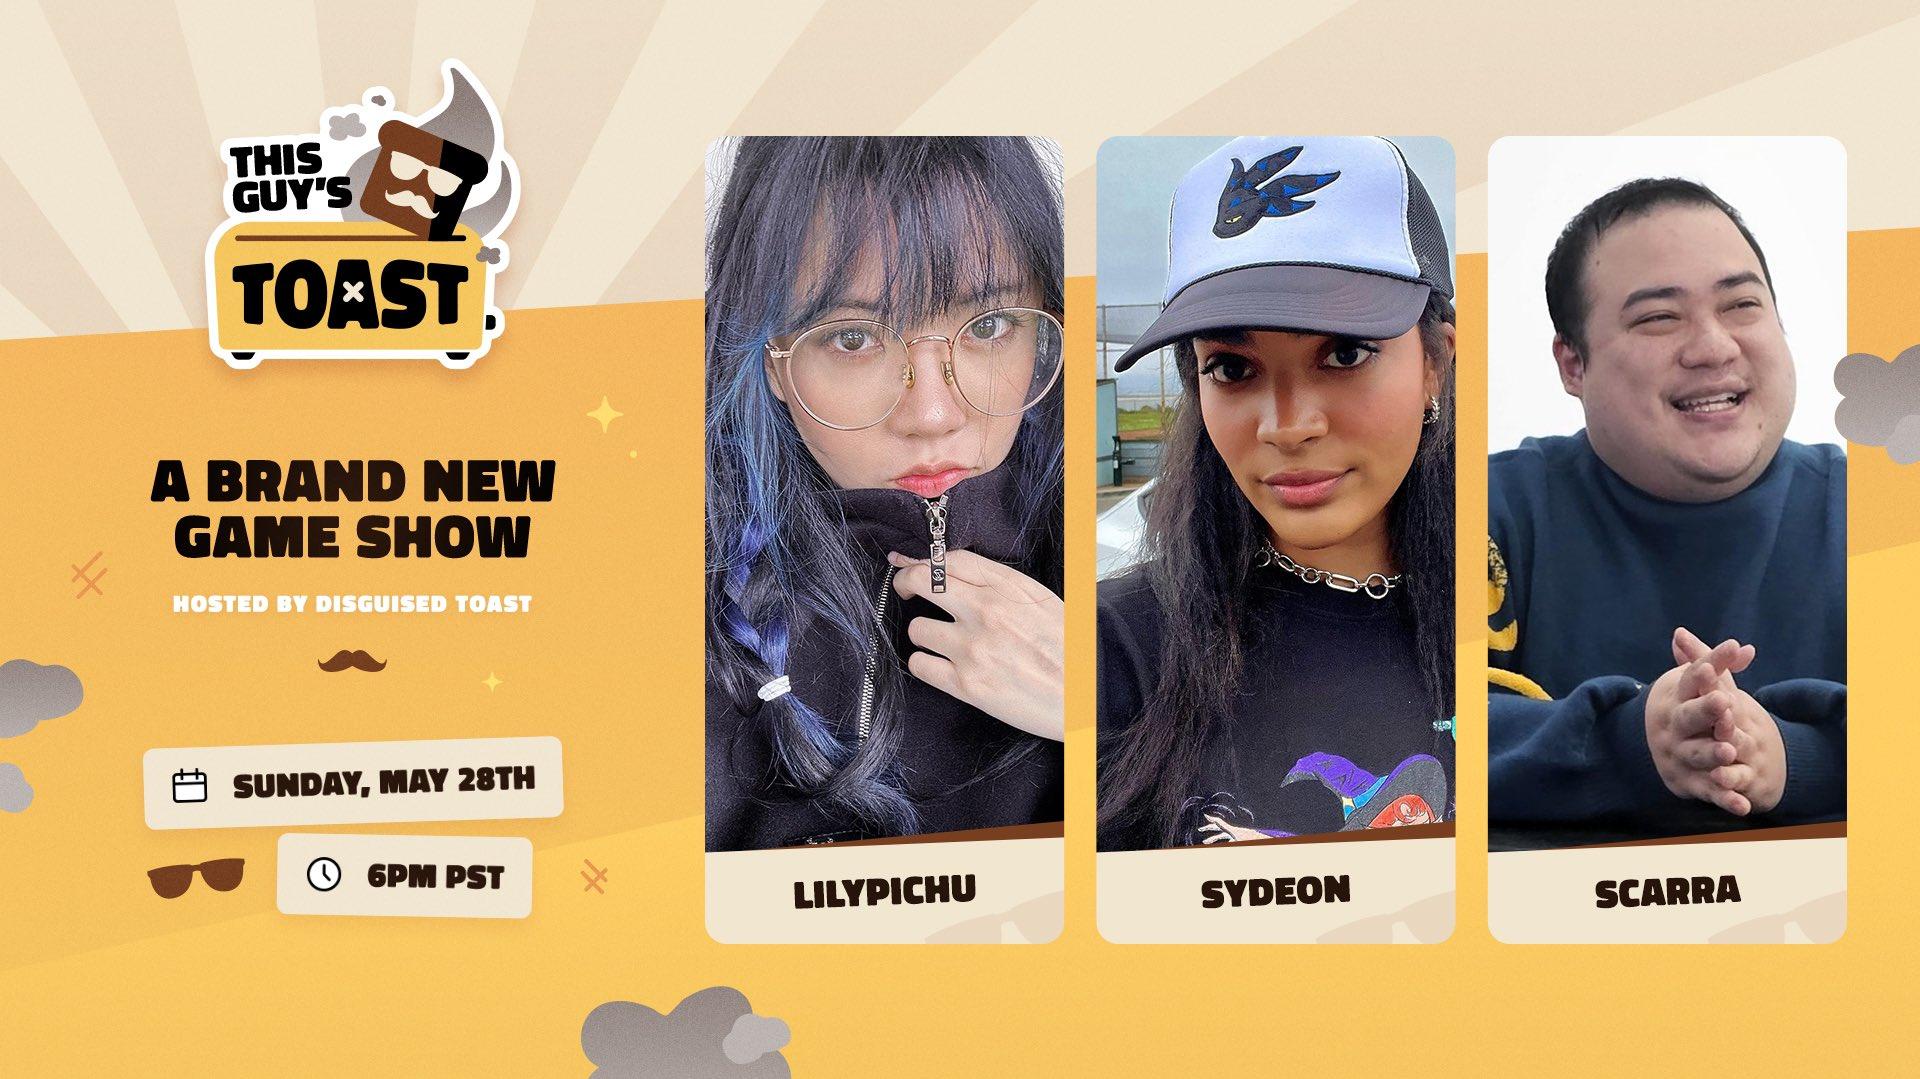 Toast S New Game Show This Guy With Lily Syd And Scarra